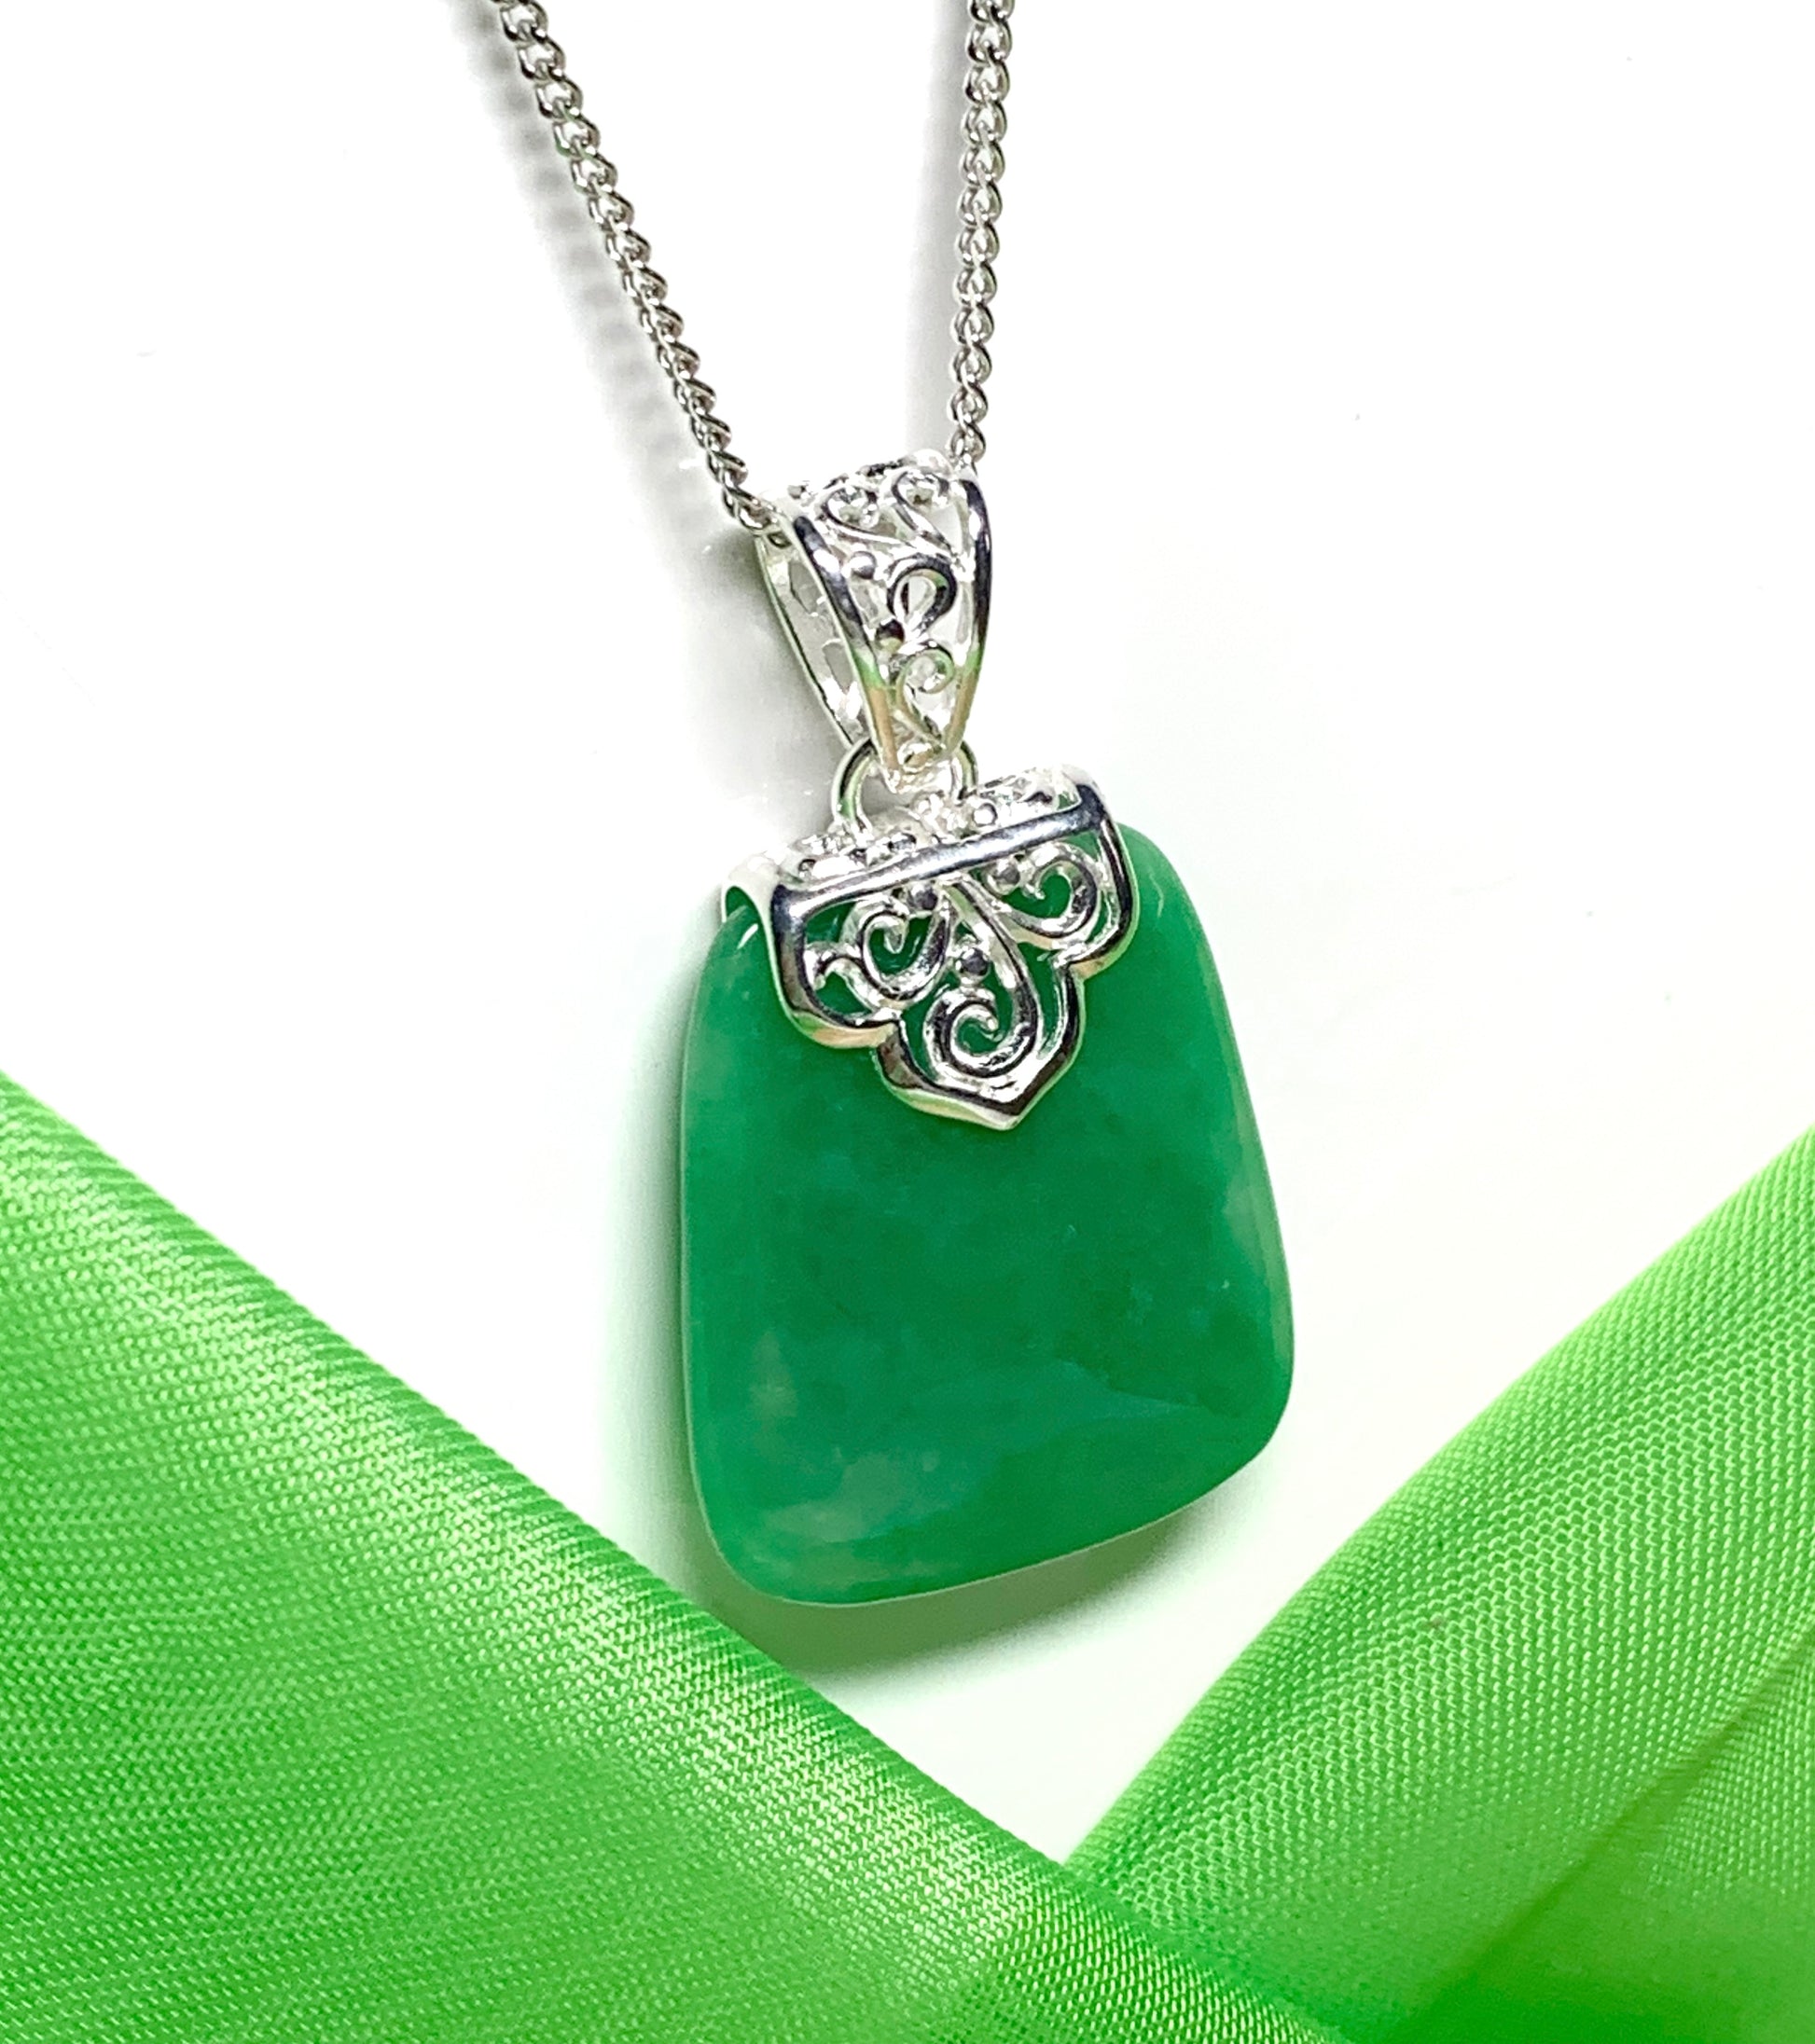 Real jade necklace dark green sterling silver cushion shaped